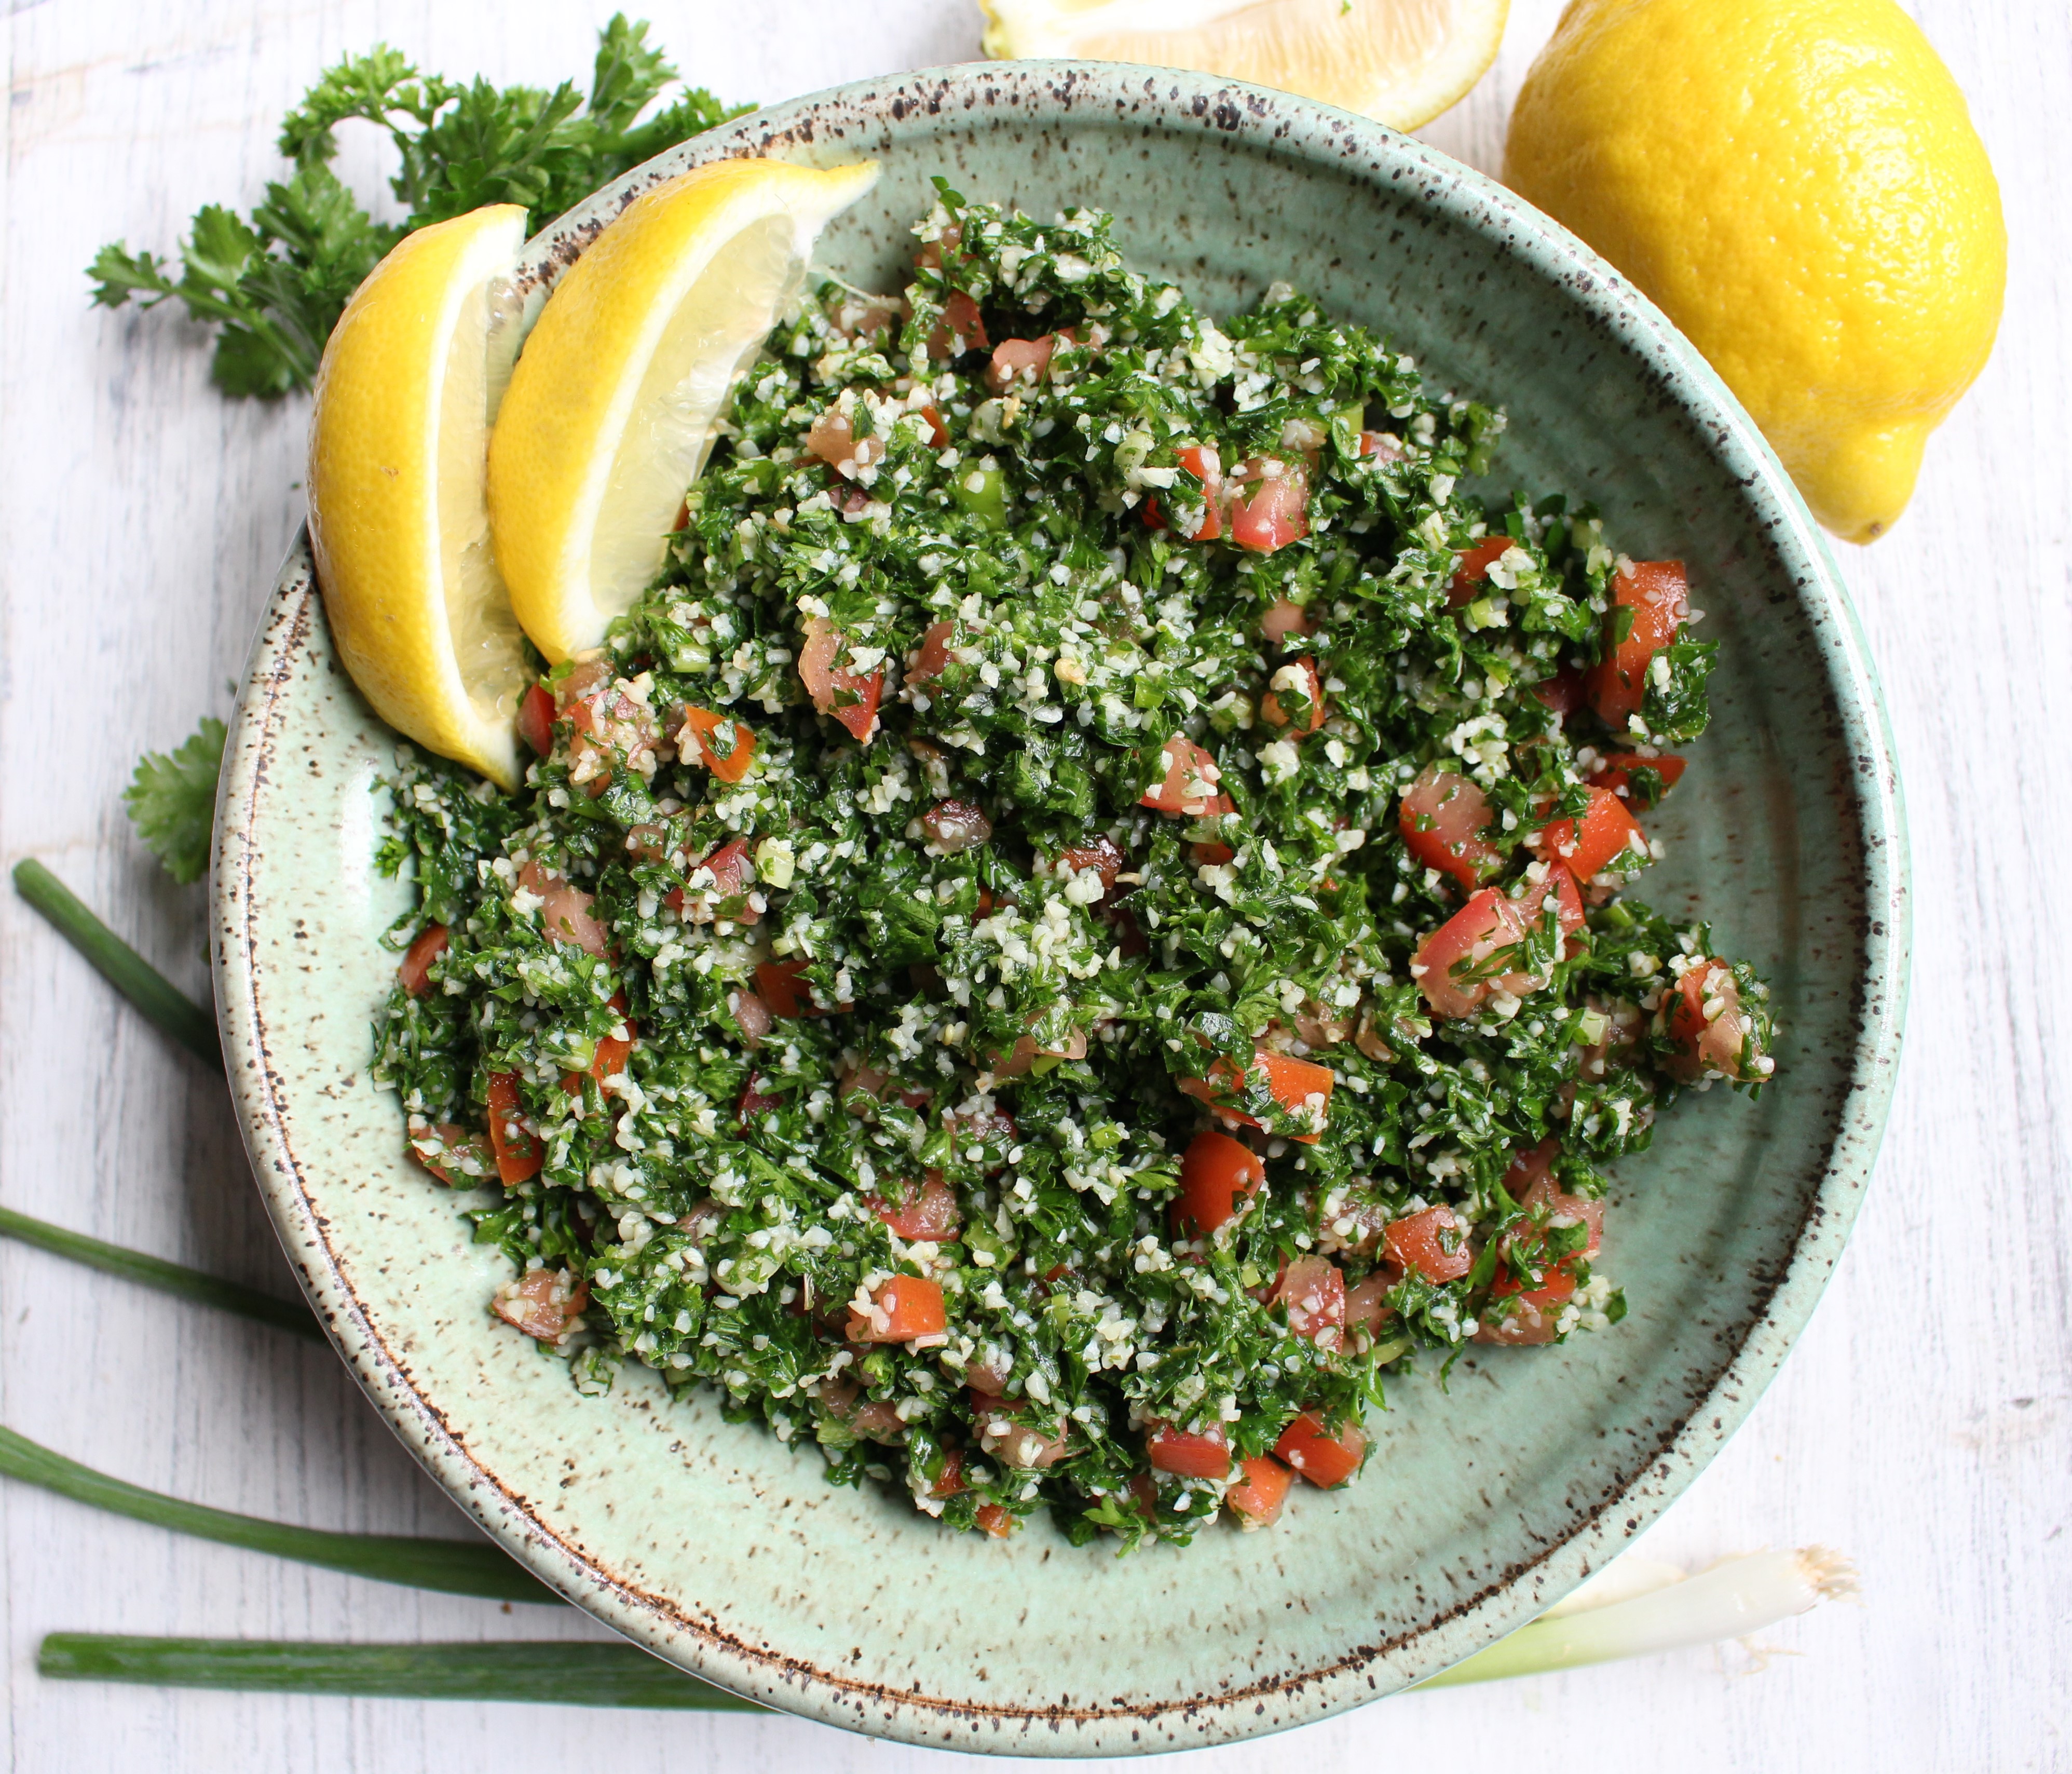 Tabbouleh - a refreshing and healthy Middle Eastern salad made with parsley, tomatoes, and bulgur. Dressed with lemon juice, olive oil, and mint, this salad is great by itself, in lettuce cups, or with avocado! 